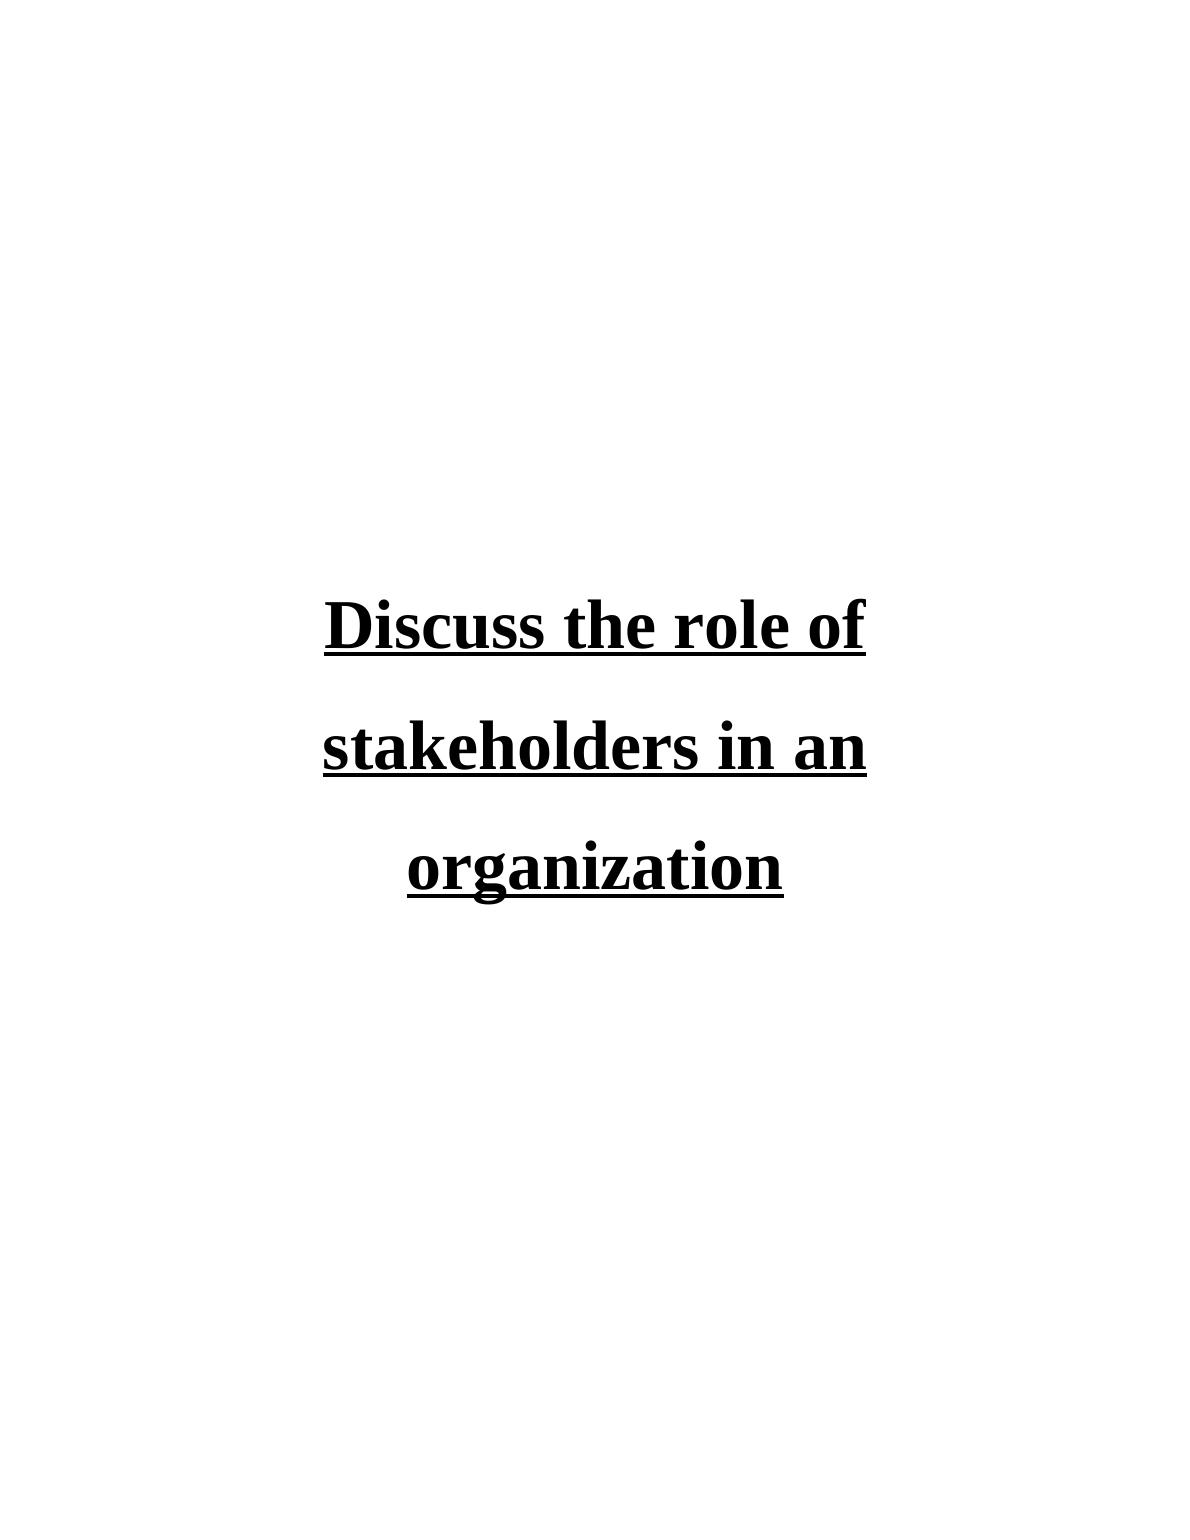 Role of Stakeholders in an Organization_1